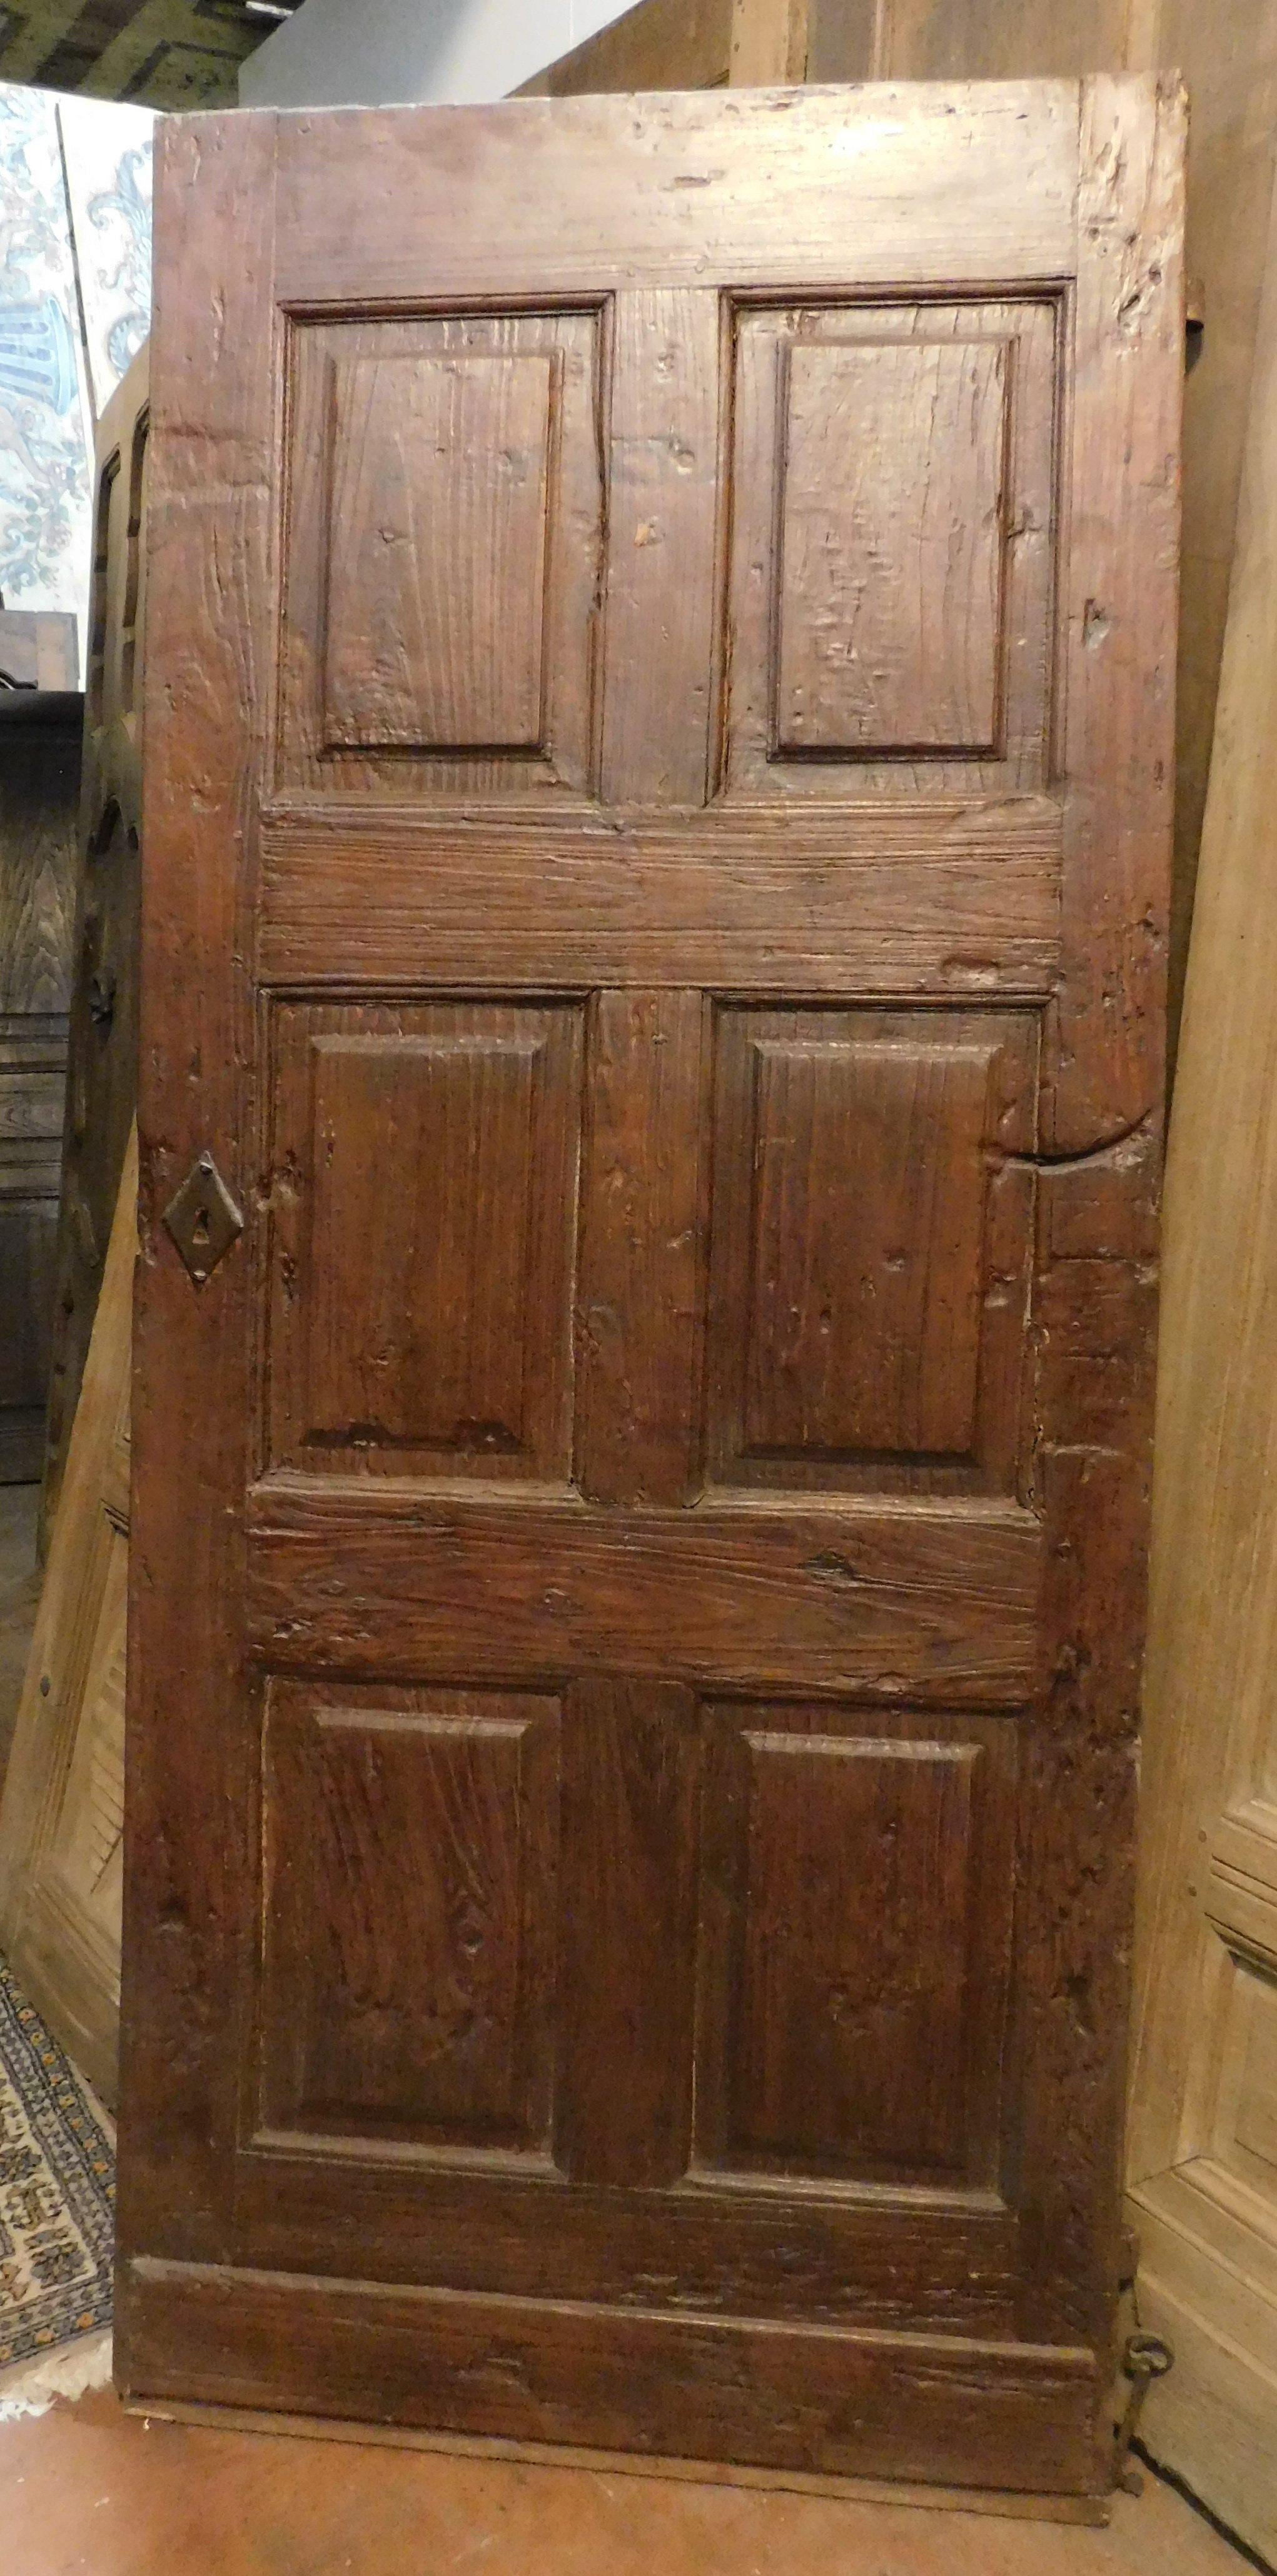 Ancient main door, carved by hand in solid walnut wood with six panels, built in the 19th century for a noble palace as an entrance to their home in the historic center, maximum size cm w 92 x H 210 x d 5.
Very thick and ideal for an important and